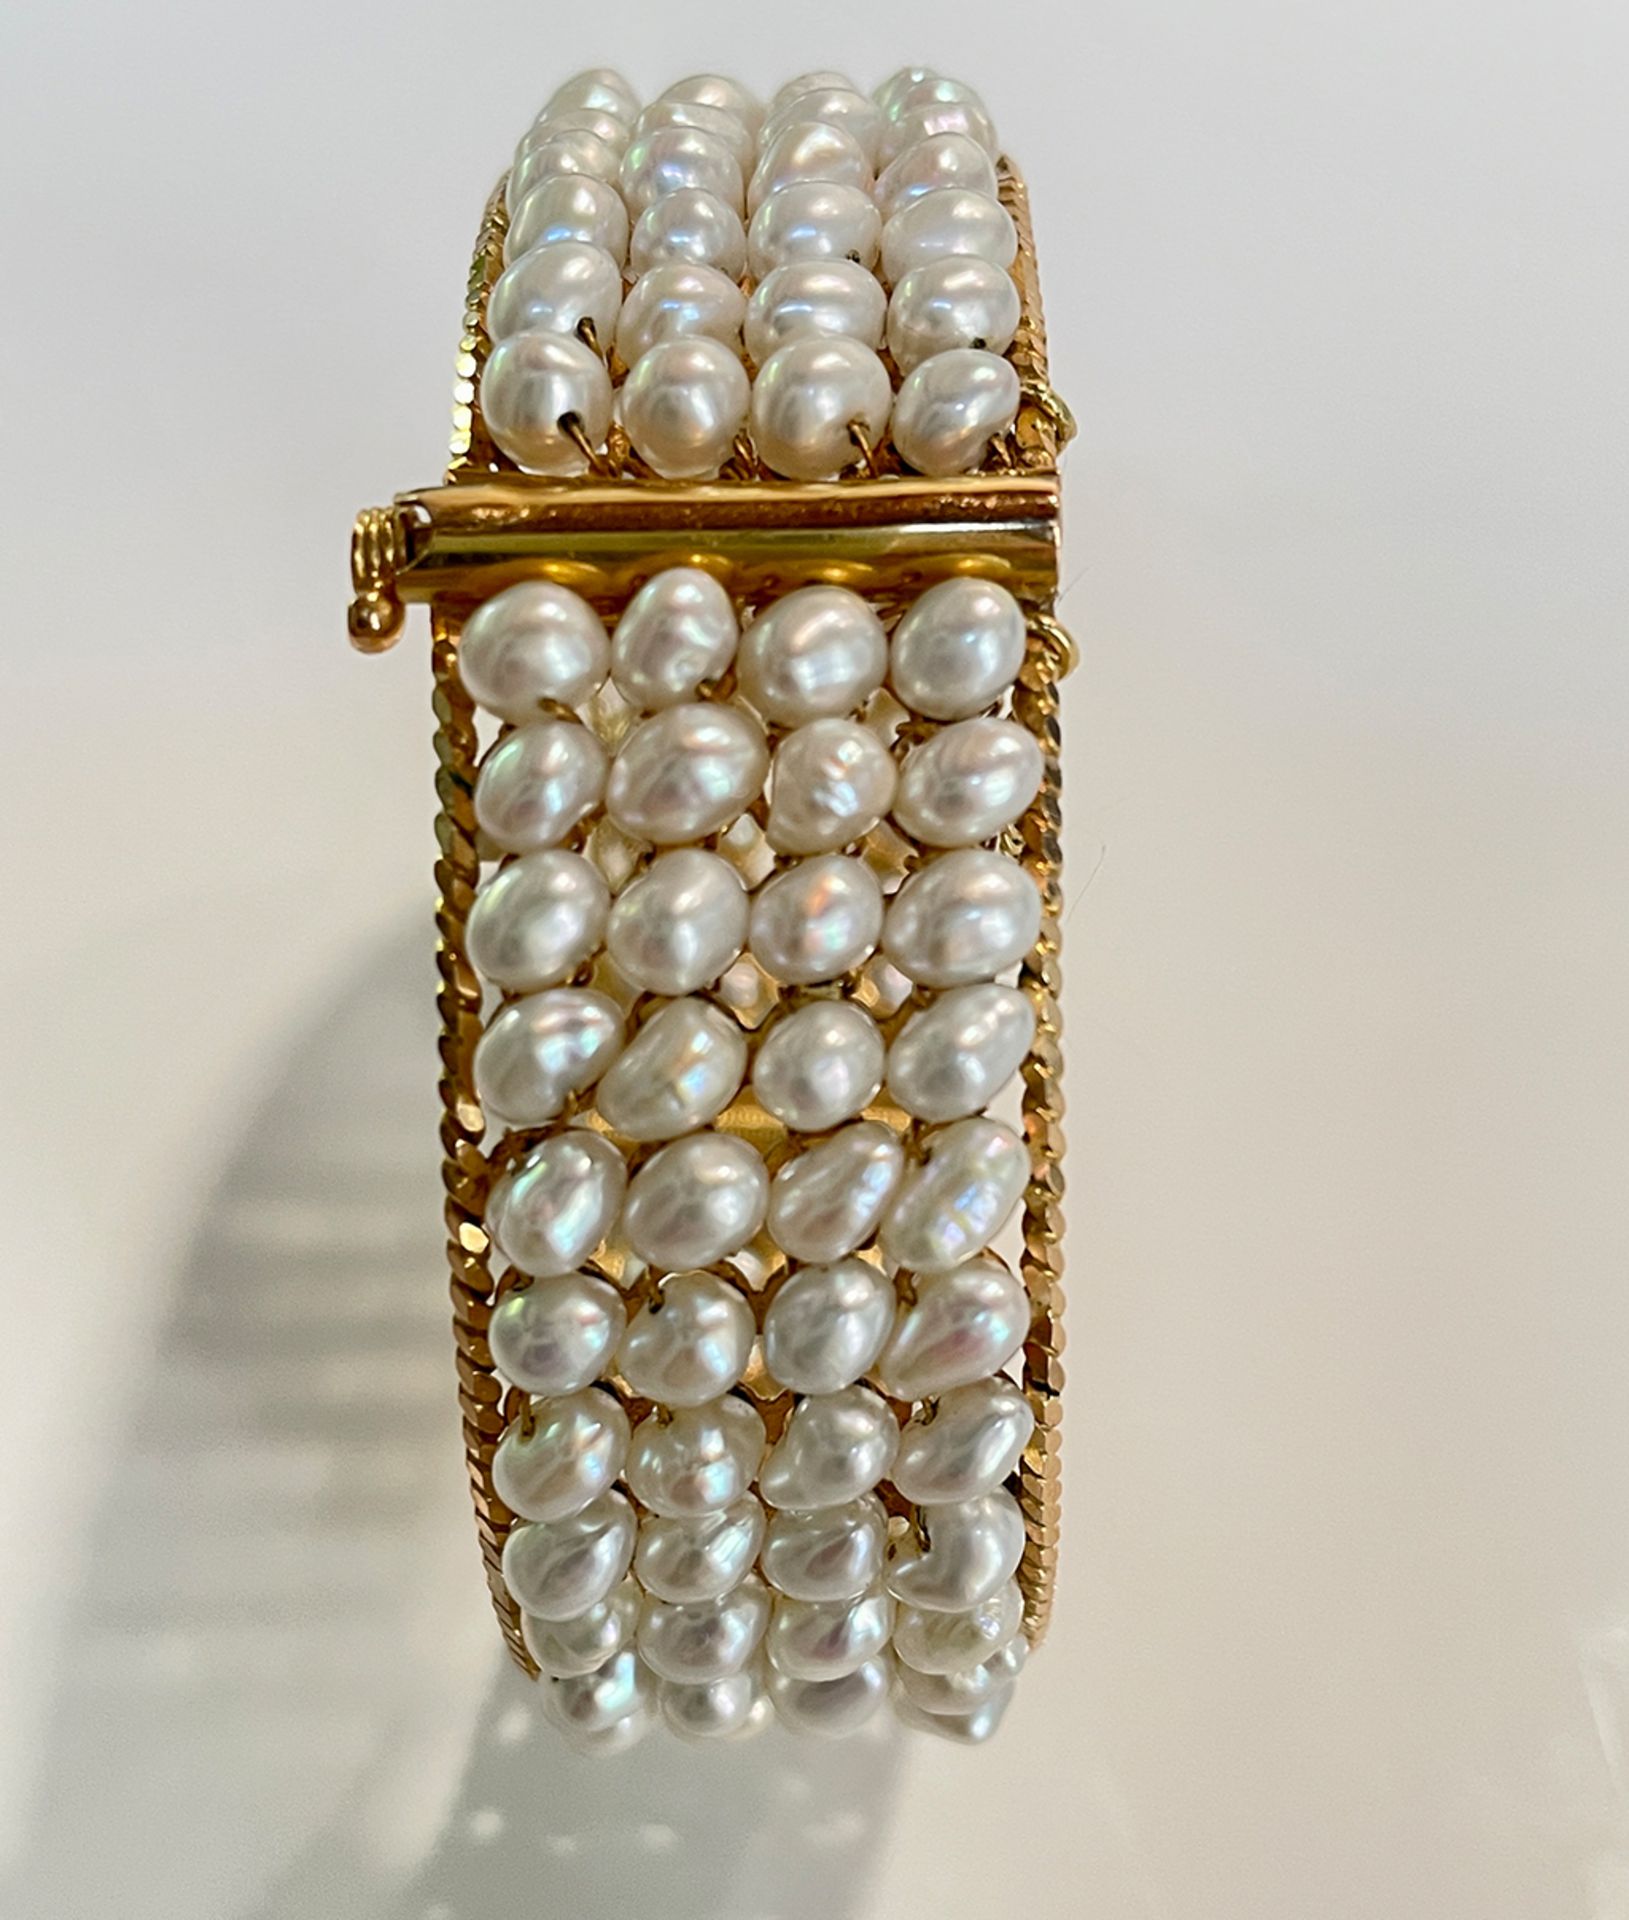 Antique 22K Gold bangle with Oriental pearls - Image 4 of 6